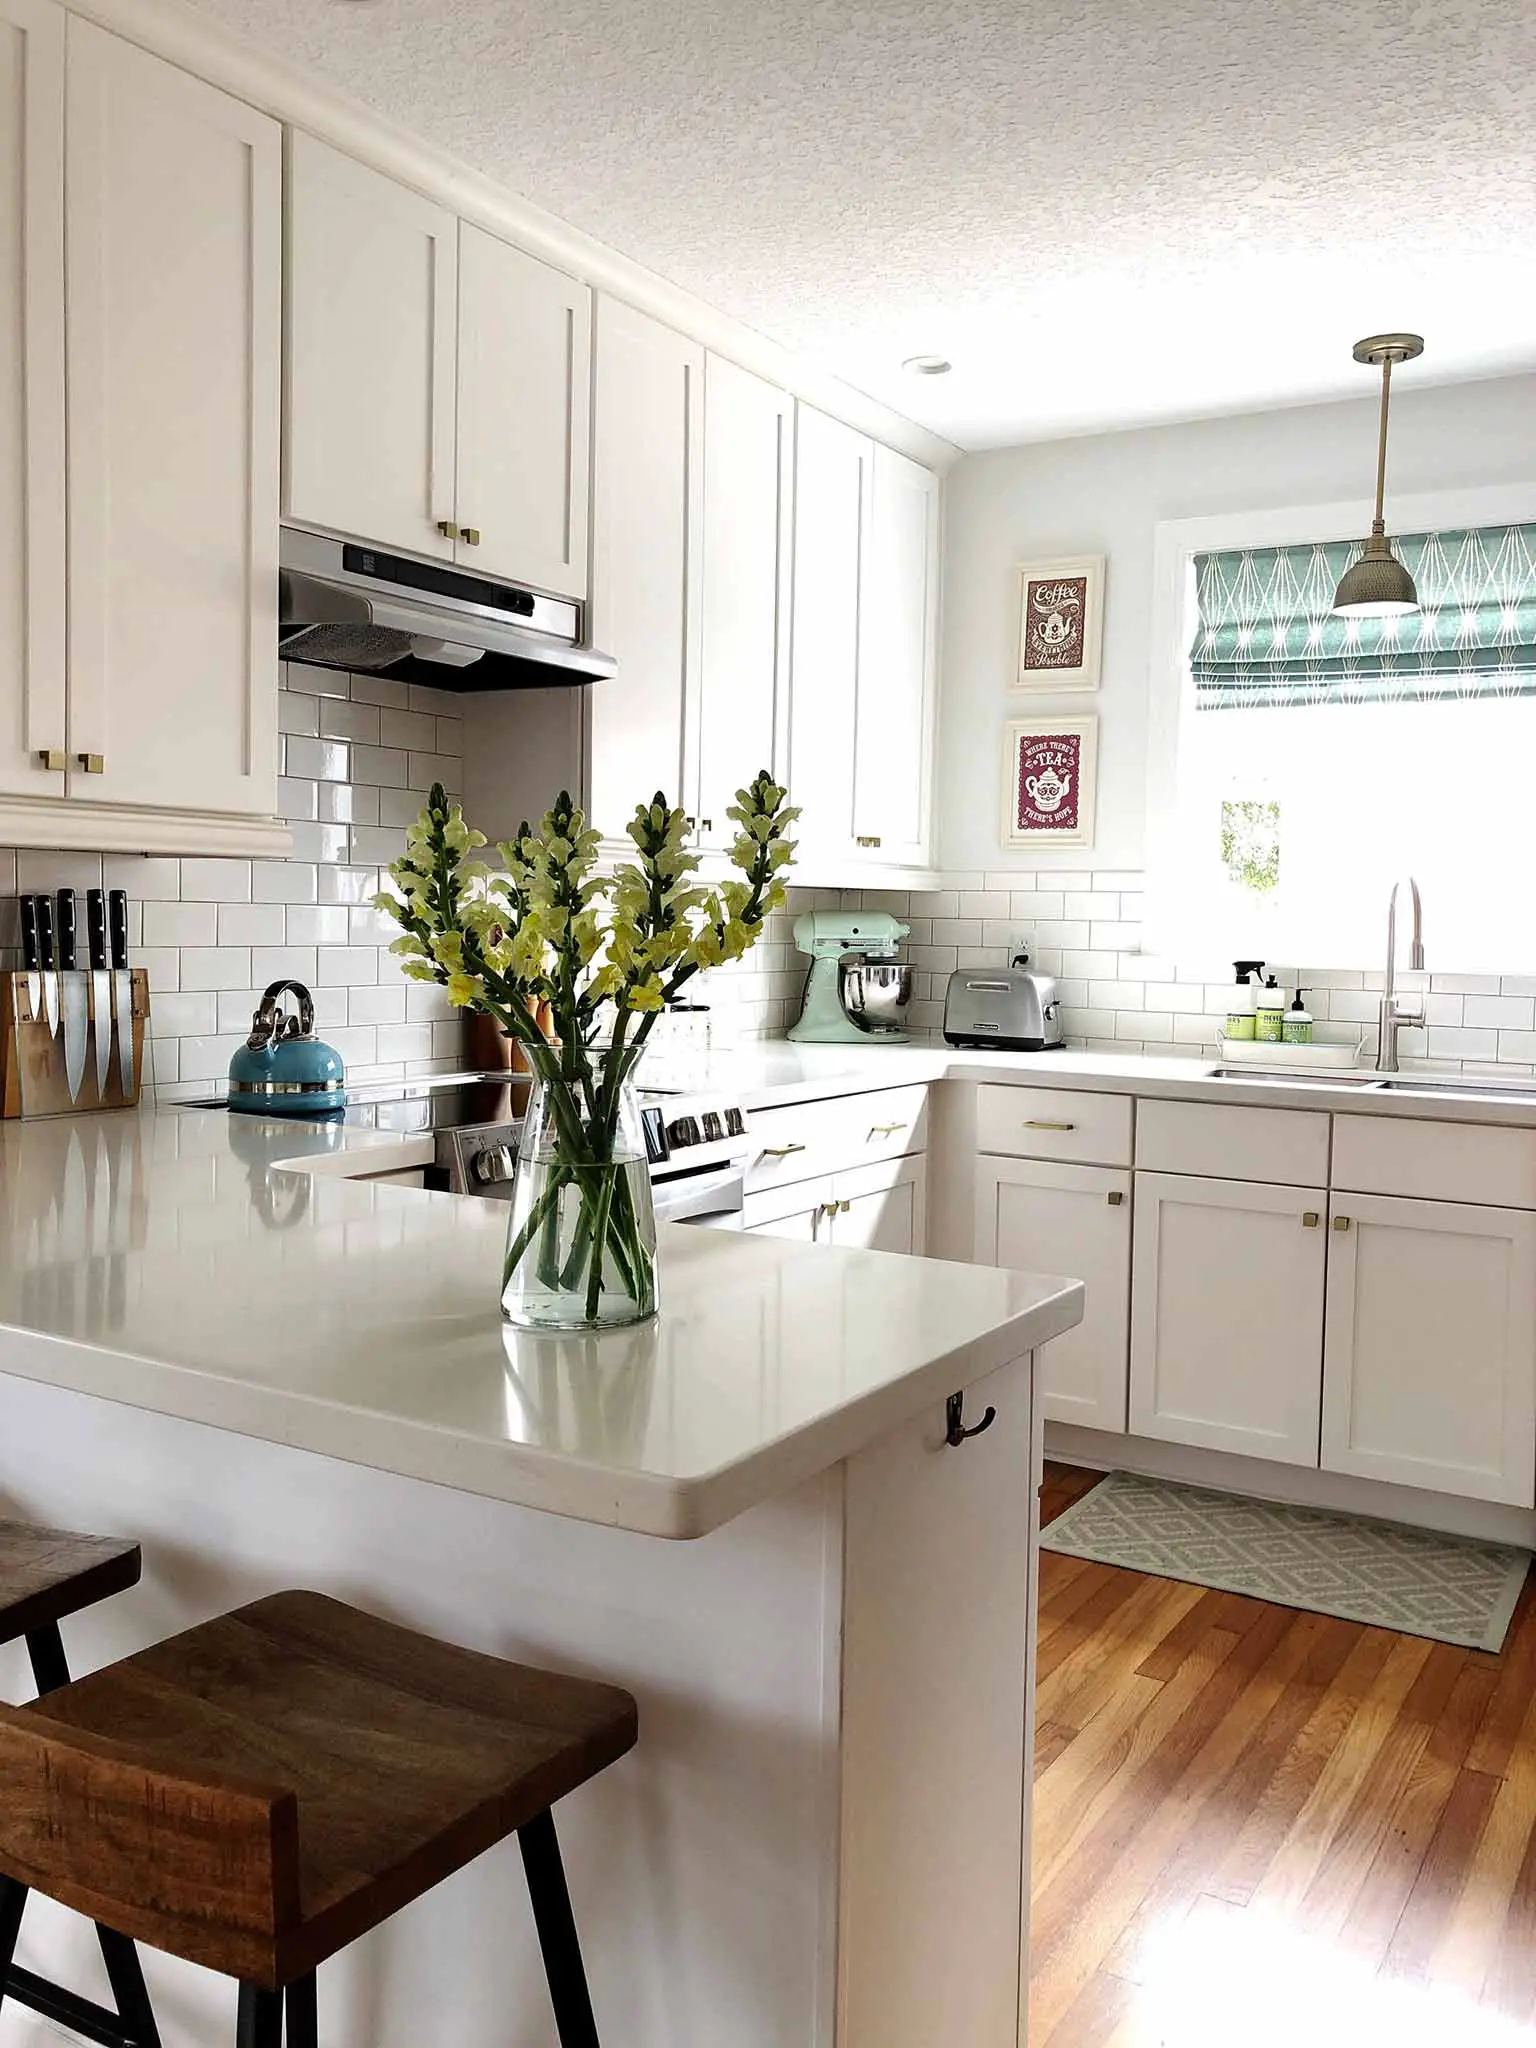 Clean white kitchen with vase of flowers on the penisular